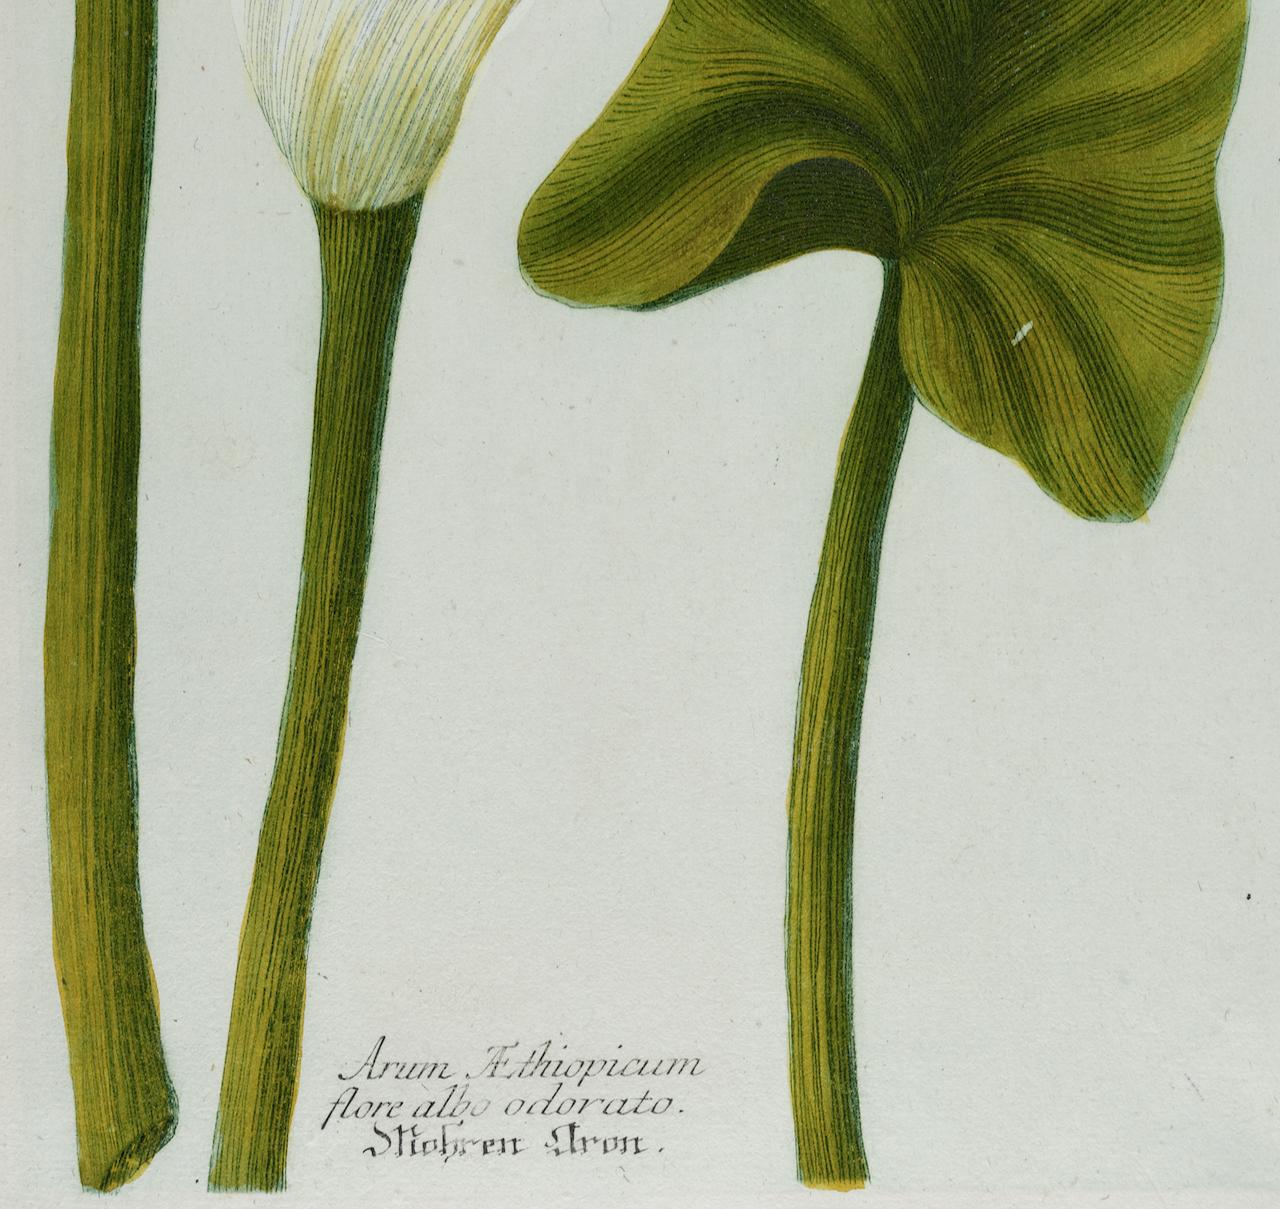 This is a beautiful original antique colored botanical mezzotint and line engraving of a flowering Calla Lily, which is finished with hand-coloring. It is entitled 